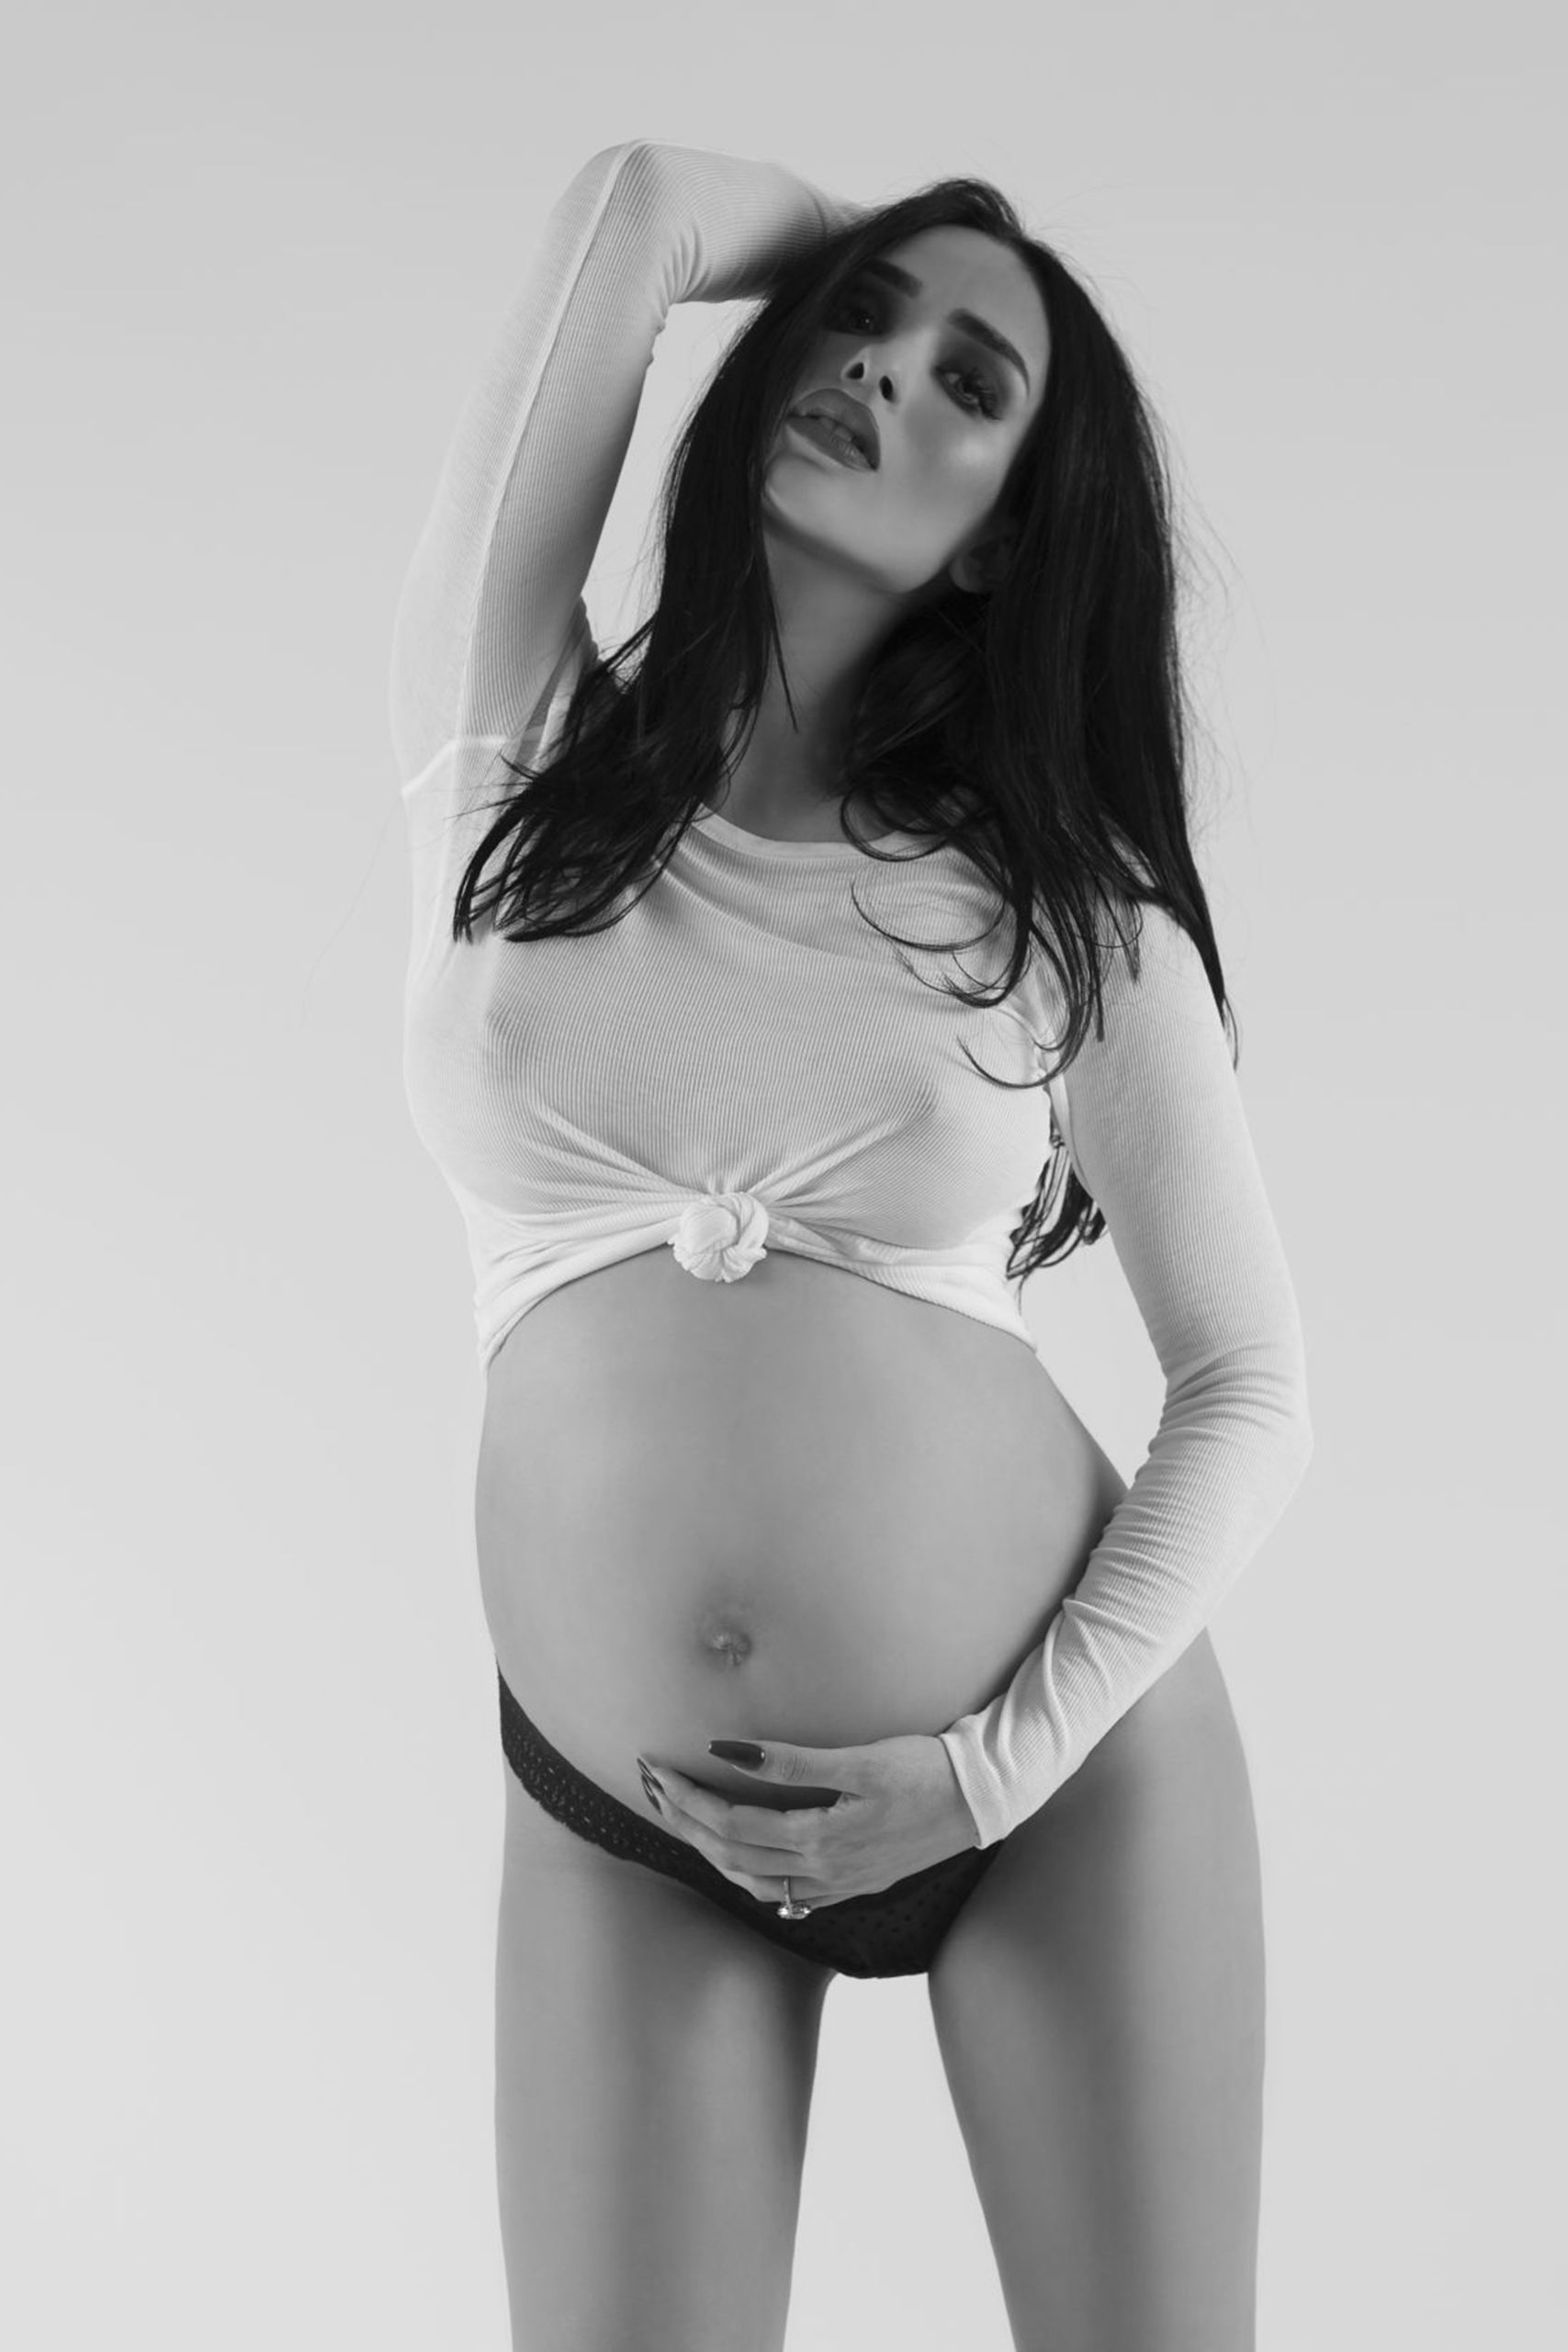 Black and white maternity photo. A woman posing sensually with her left hand on her exposed stomach and her right on the back of her head, which is tilted back.